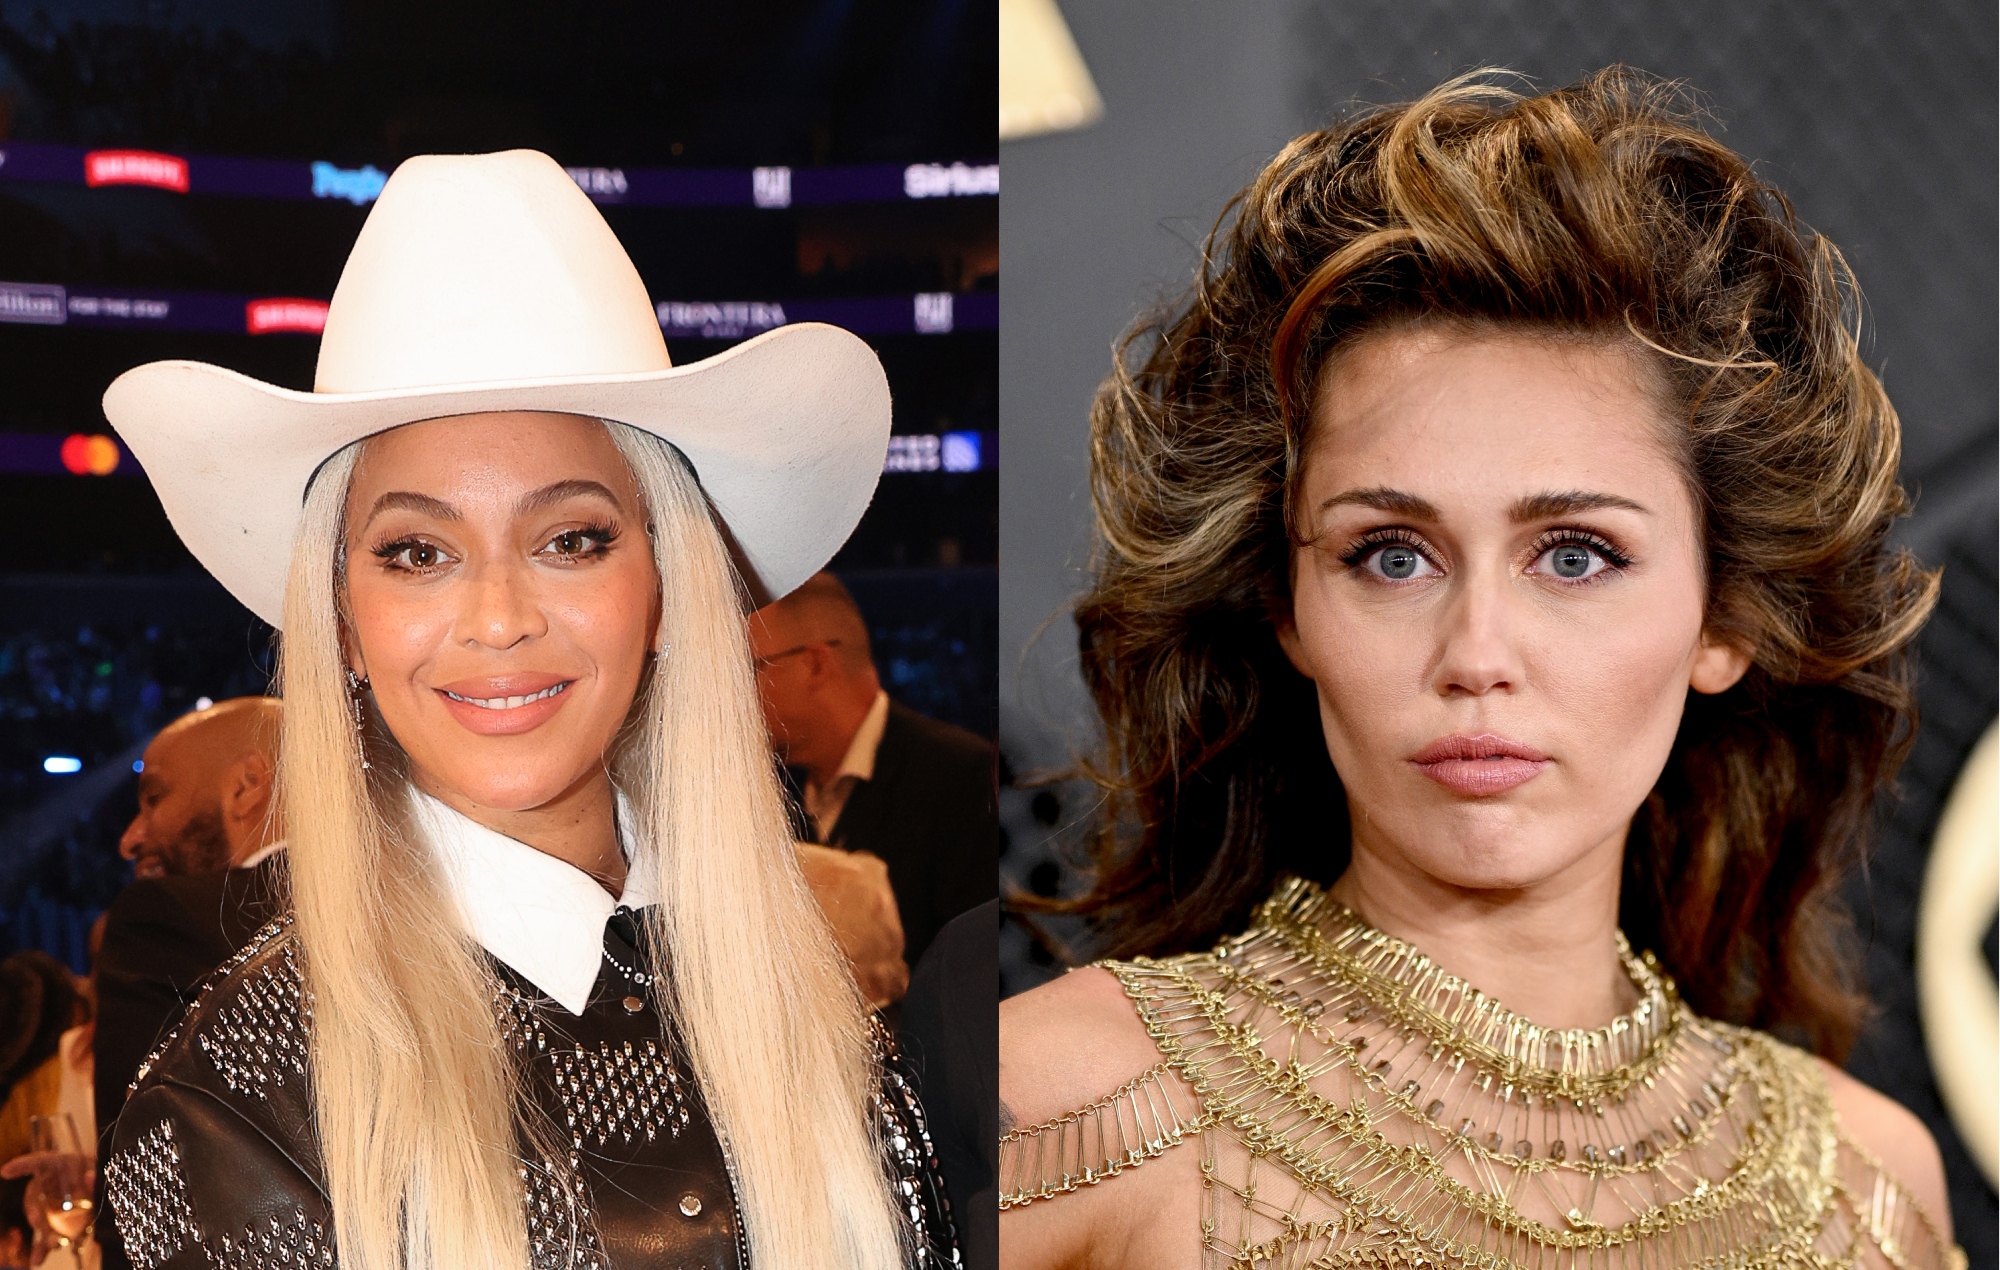 Listen to Beyoncé and Miley Cyrus’ tender new collaboration ‘II MOST WANTED’